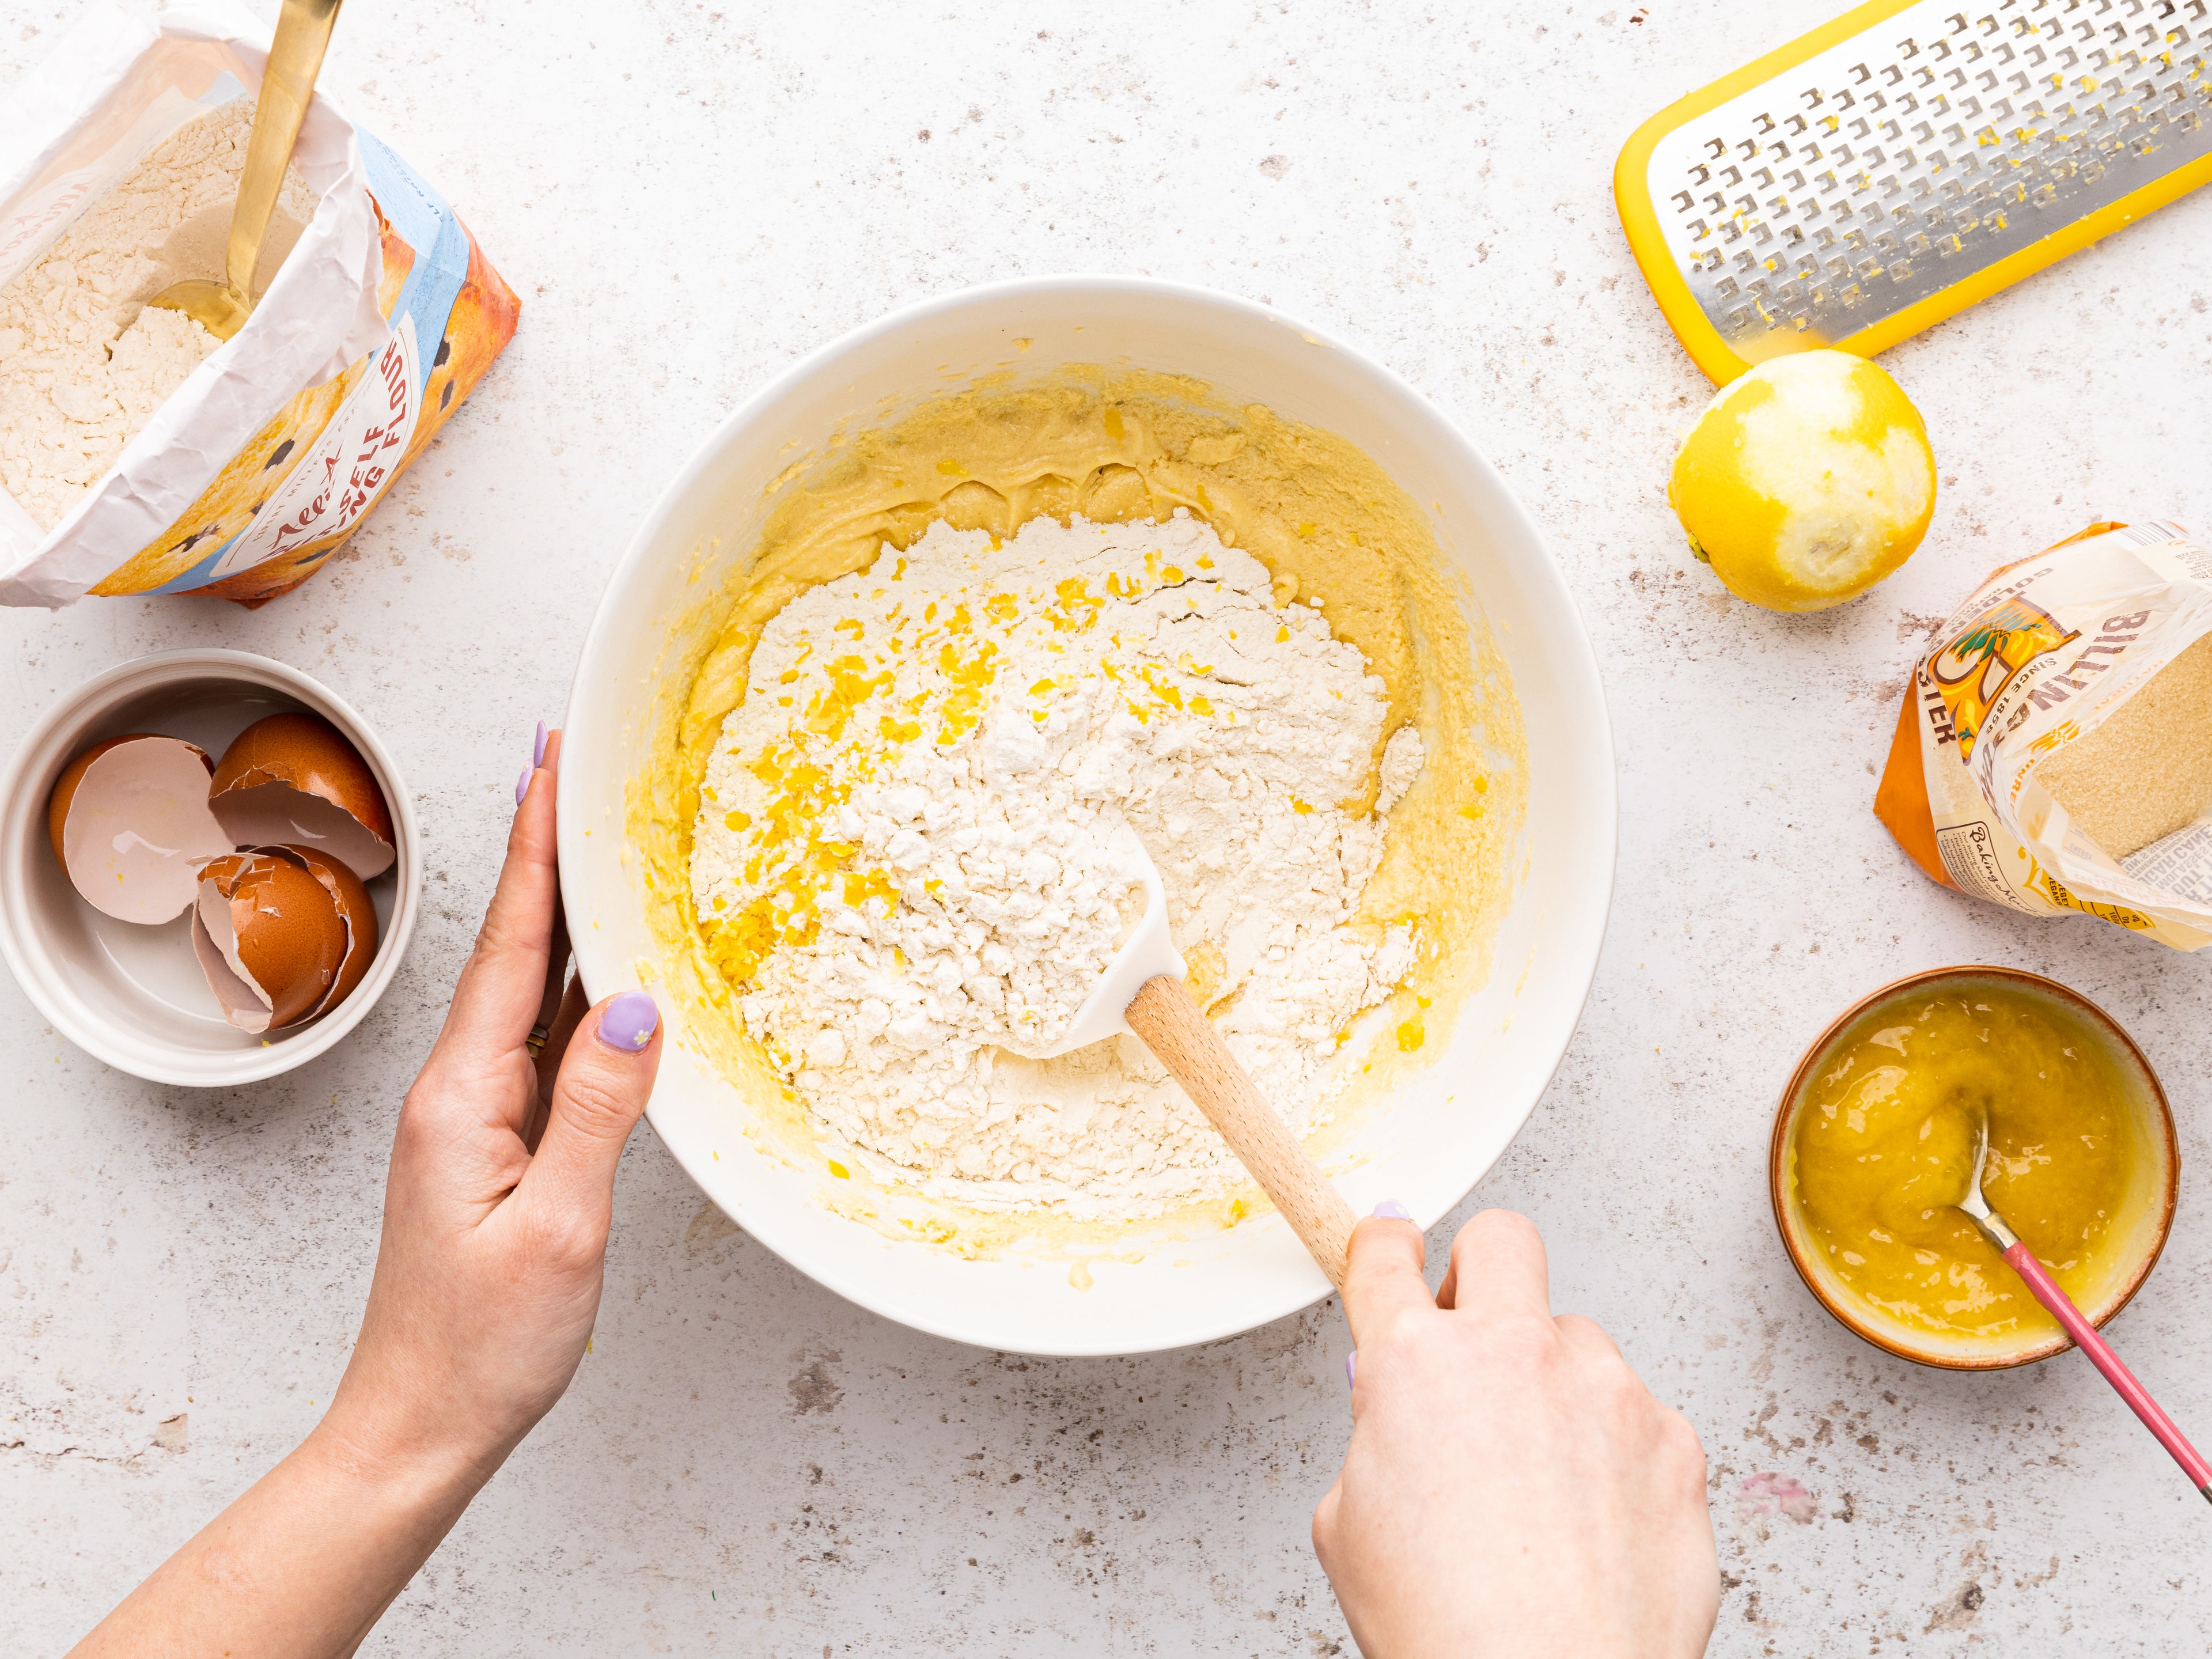 Ingredients being mixed in a bowl with a wooden spoon and a grated lemon beside